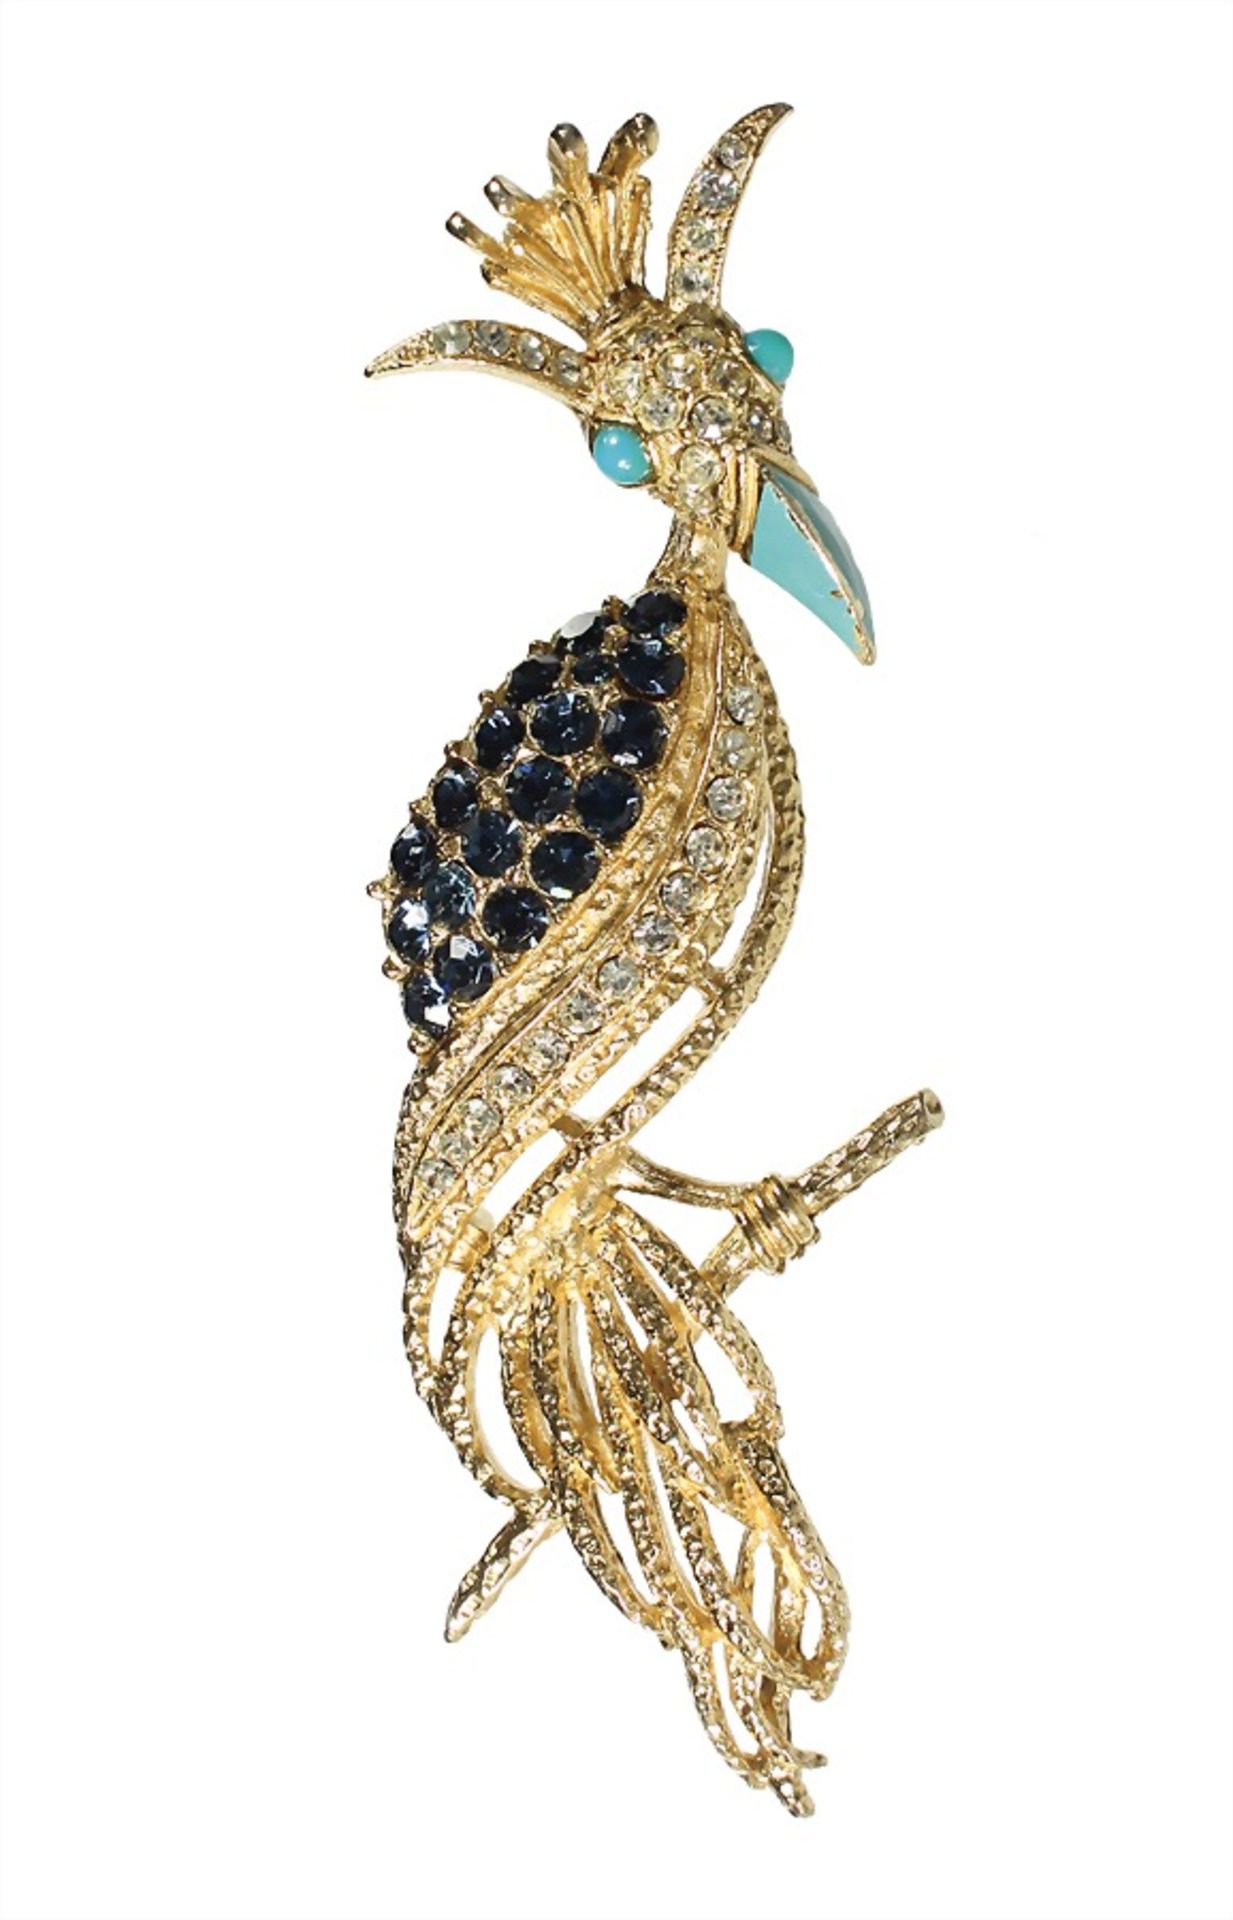 brooch, bird, gold colored, signed FLORENZA (USA), set with white and blue stones, enamel coating,